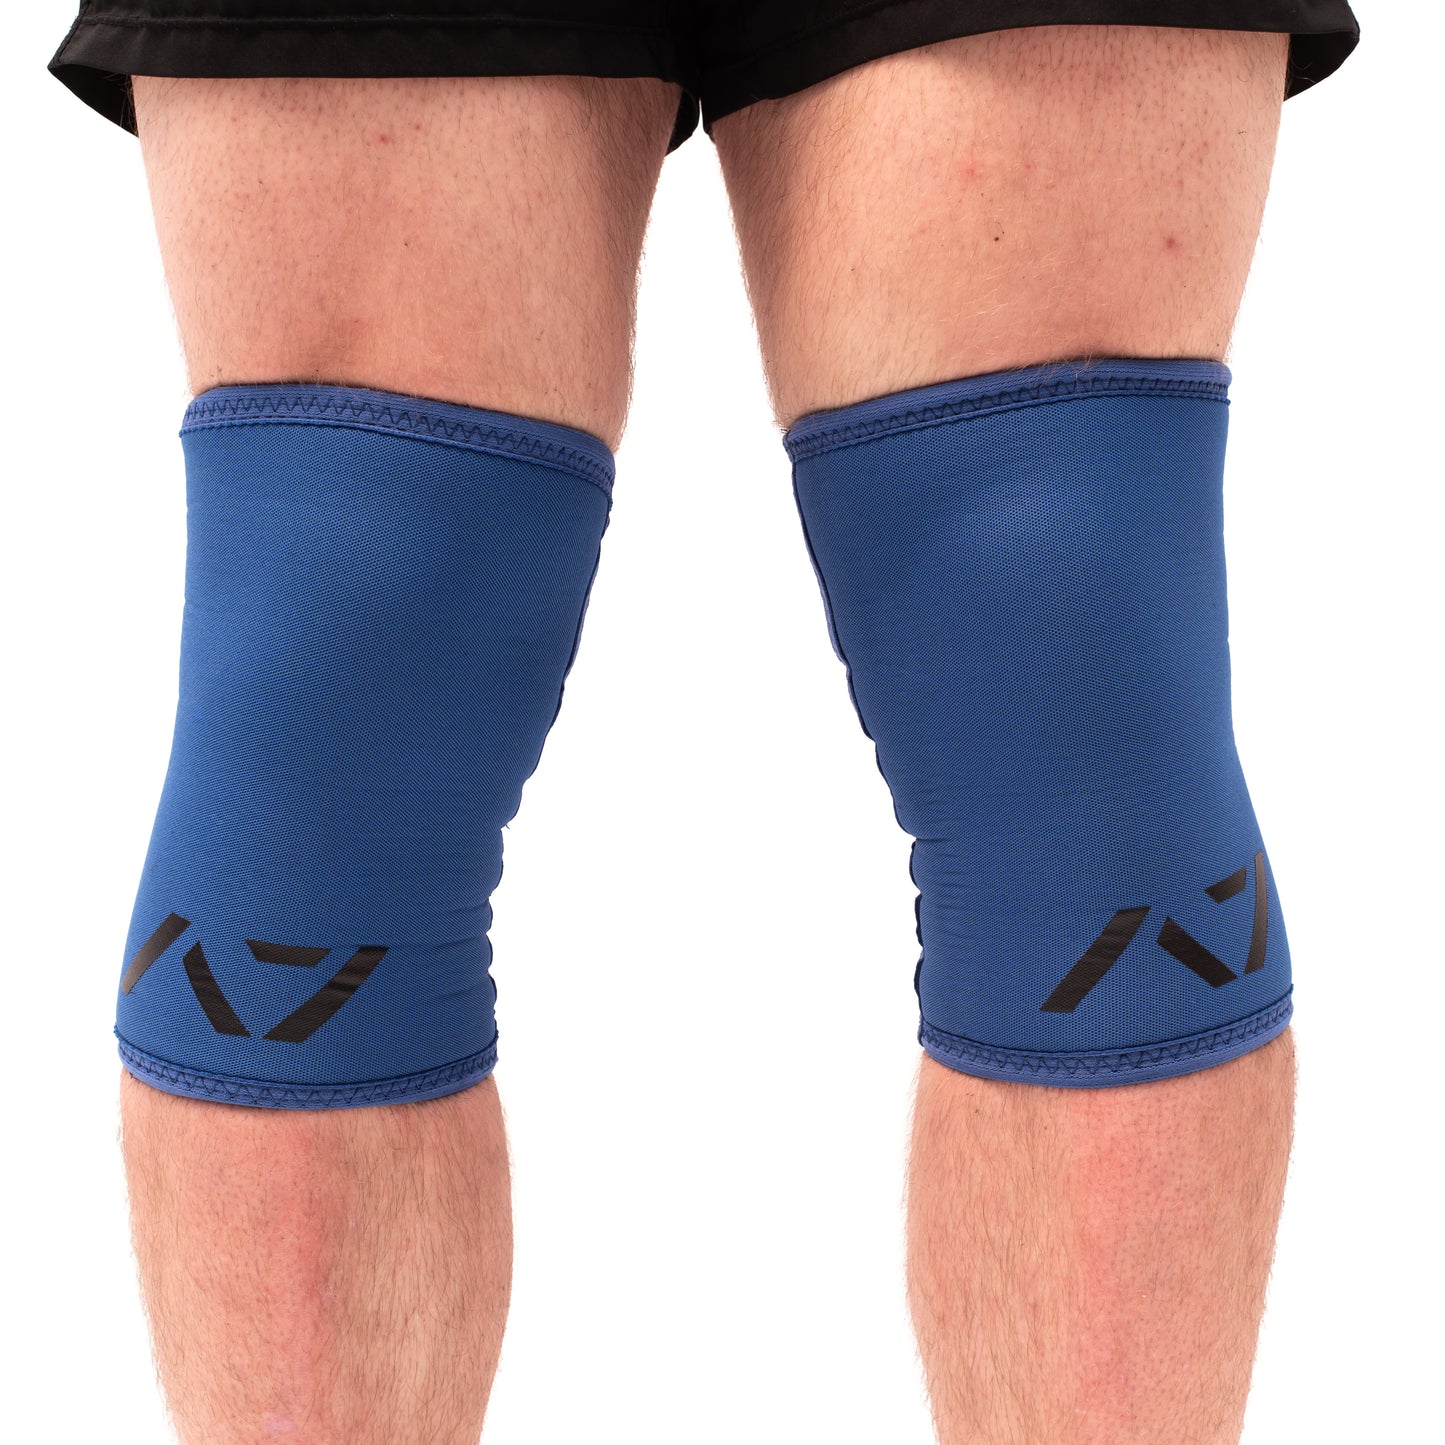 CONE Royal Blue Knee Sleeves - USPA & IPF Approved | A7